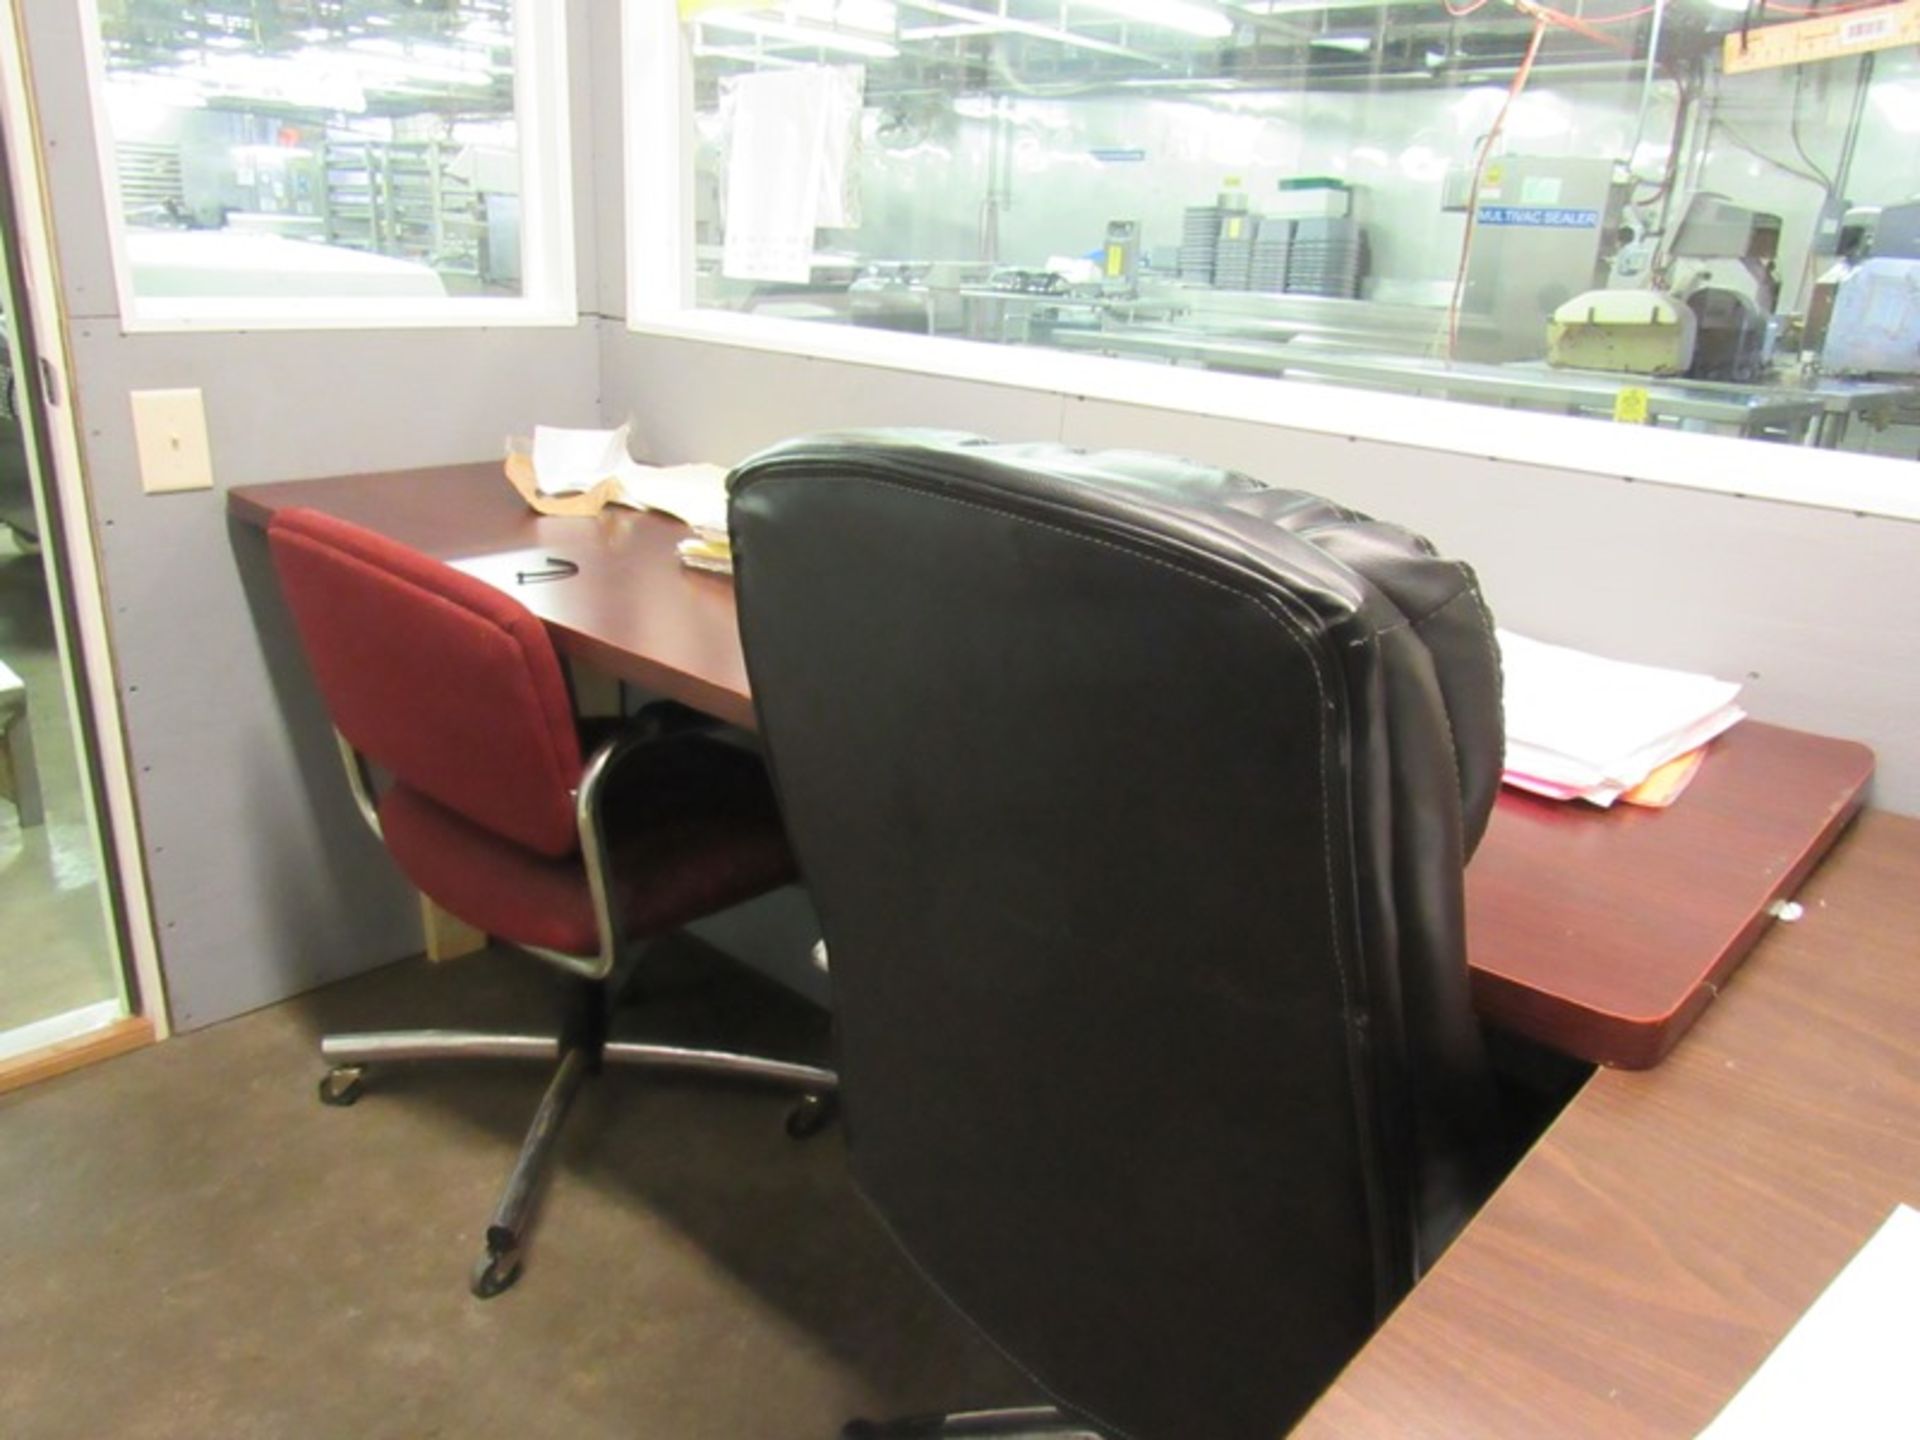 Lot of Offices in Plant/Cafeteria, (2) Desks, Table, (3) Chairs, (2) Plastic Tables, 6' 8', (2) Plas - Image 2 of 9